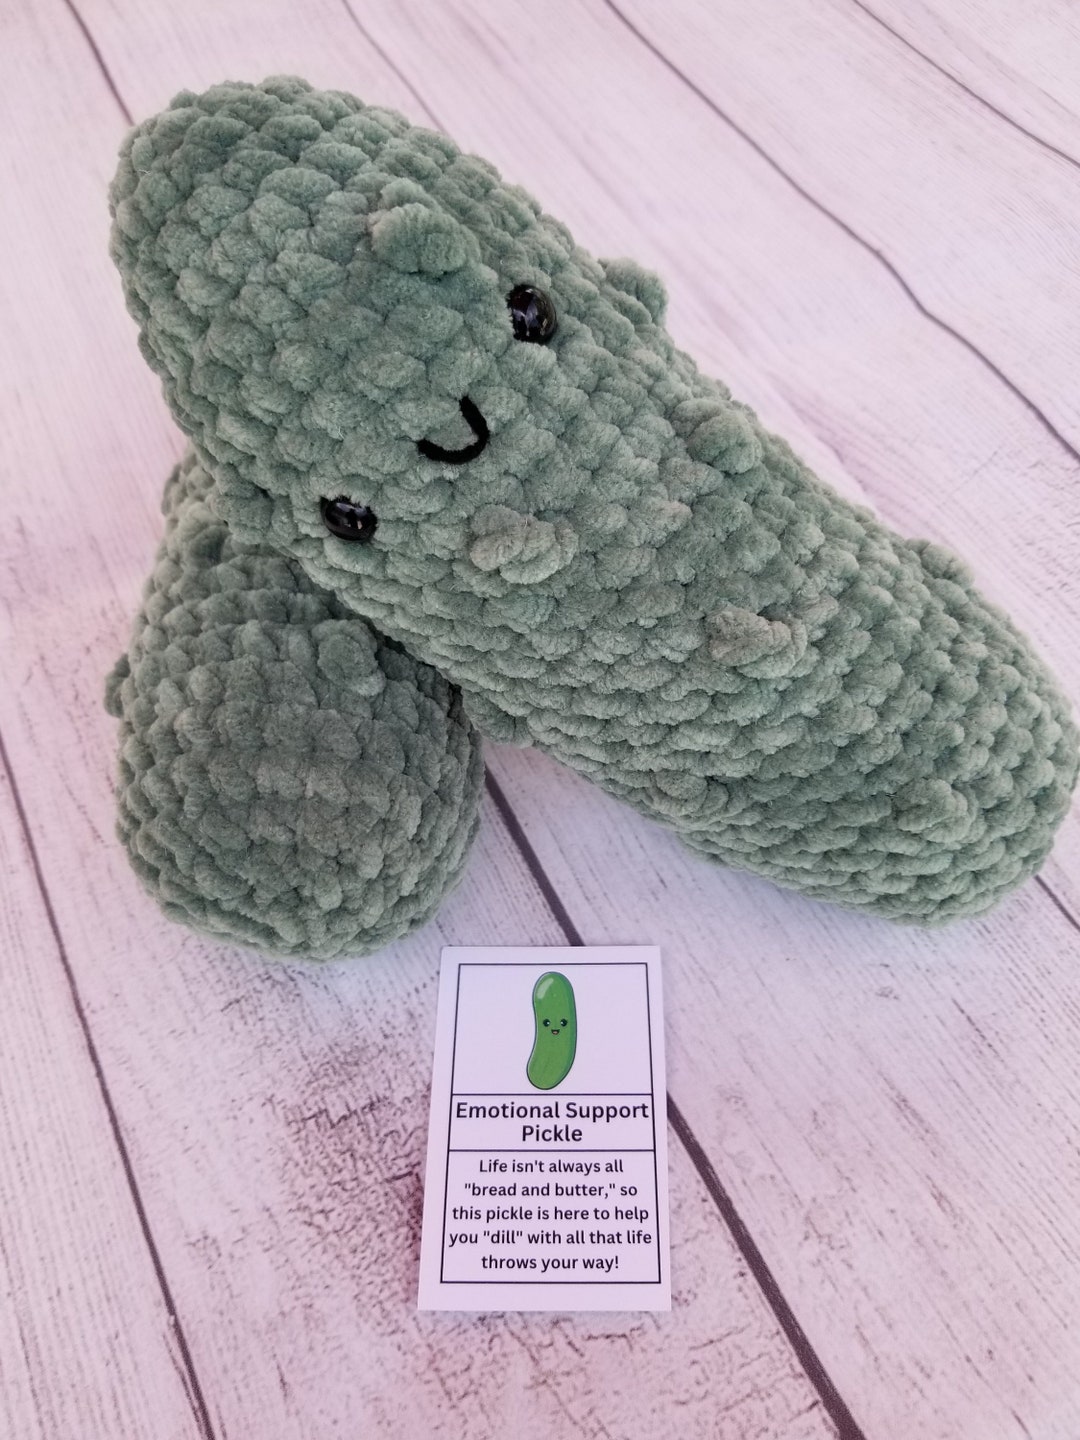 Felt emotional support pickle in a matchbox by ReiCreazioni on